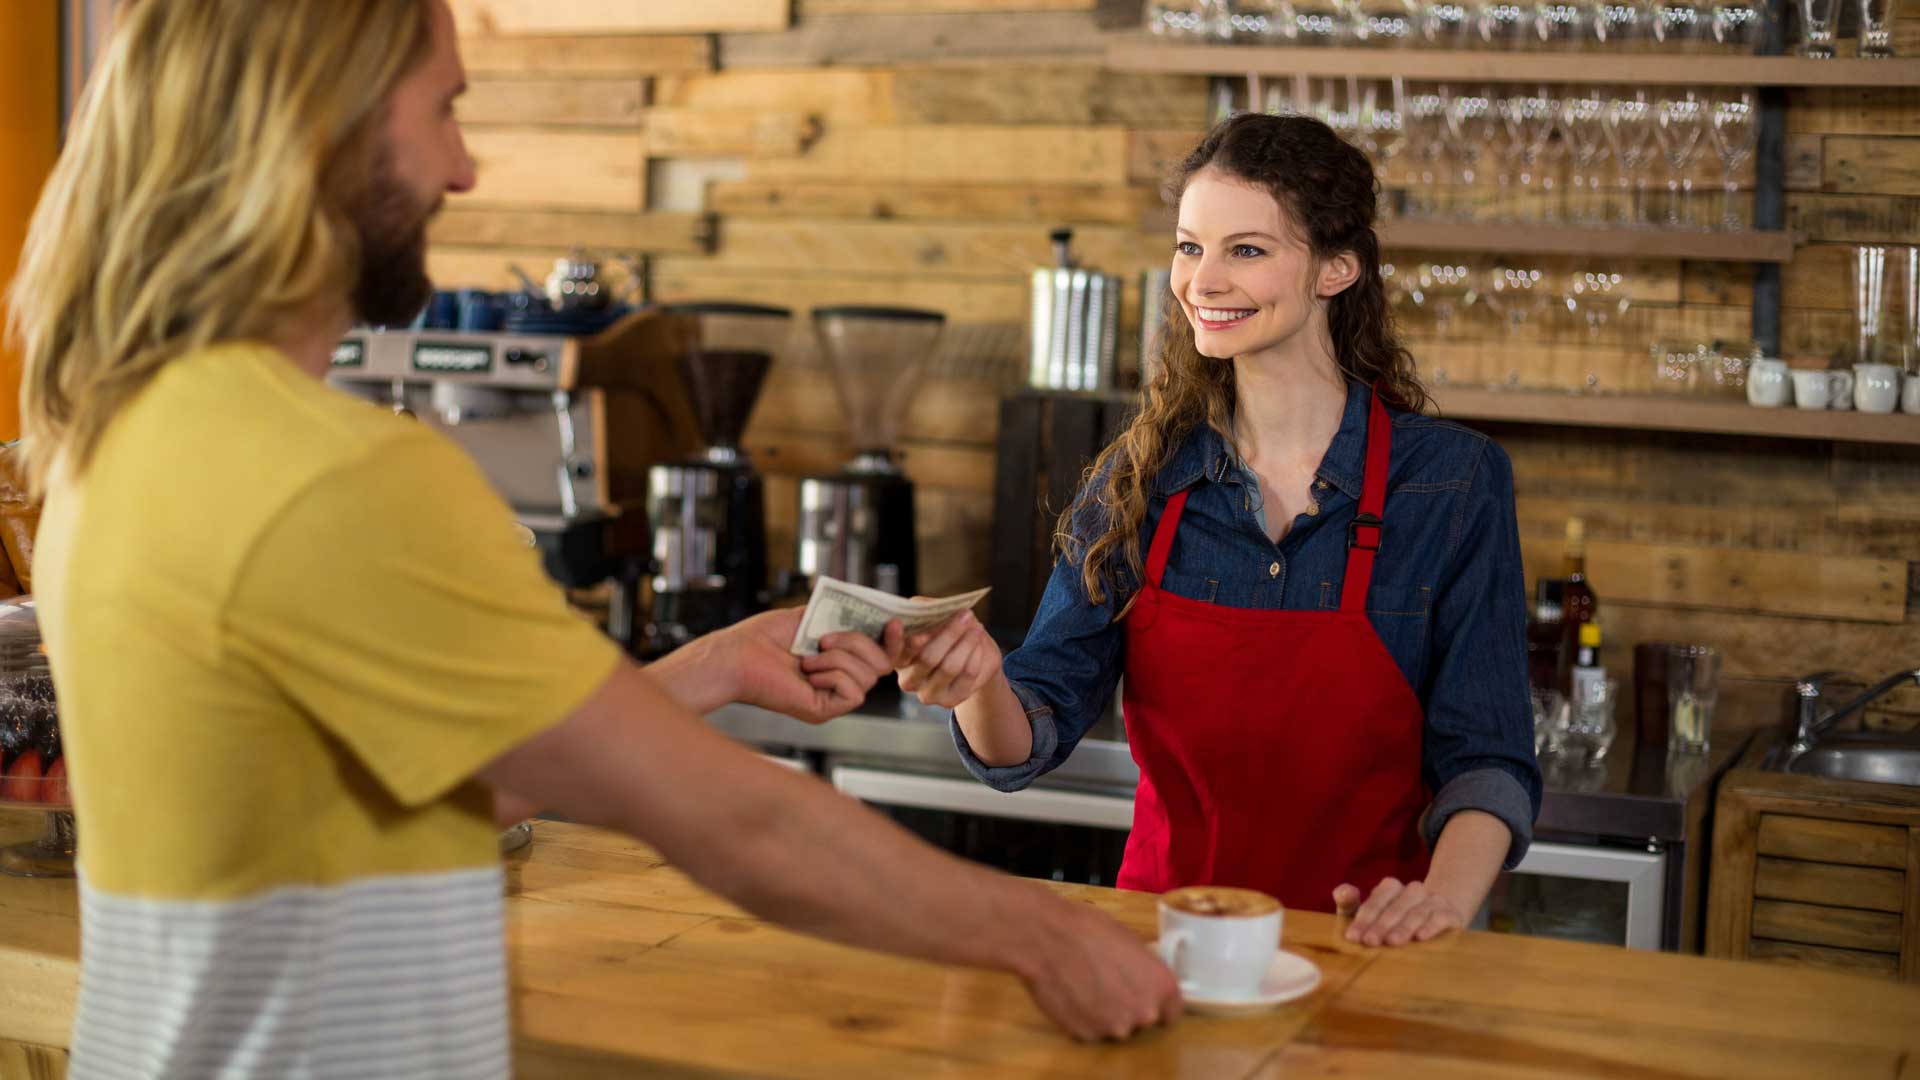 smiling woman giving change back in a coffee shop | cash discount program